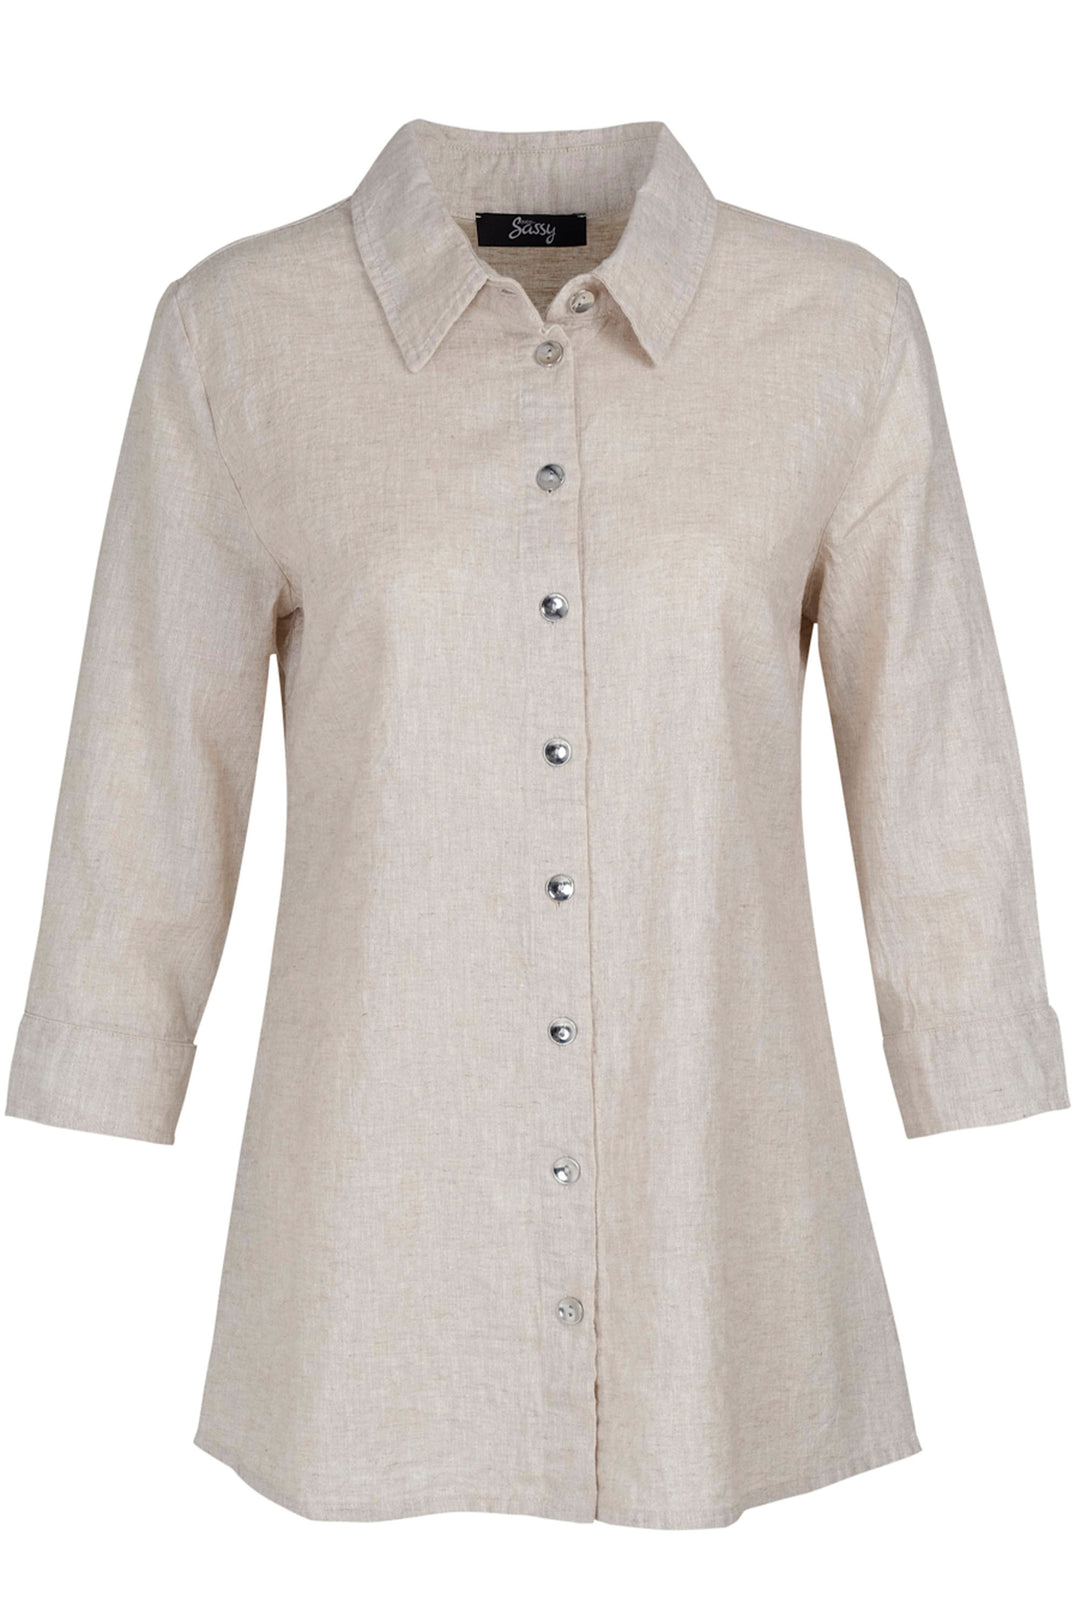 EverSassy Spring 2023 women's casual relaxed fit linen shirt blouse - natural front